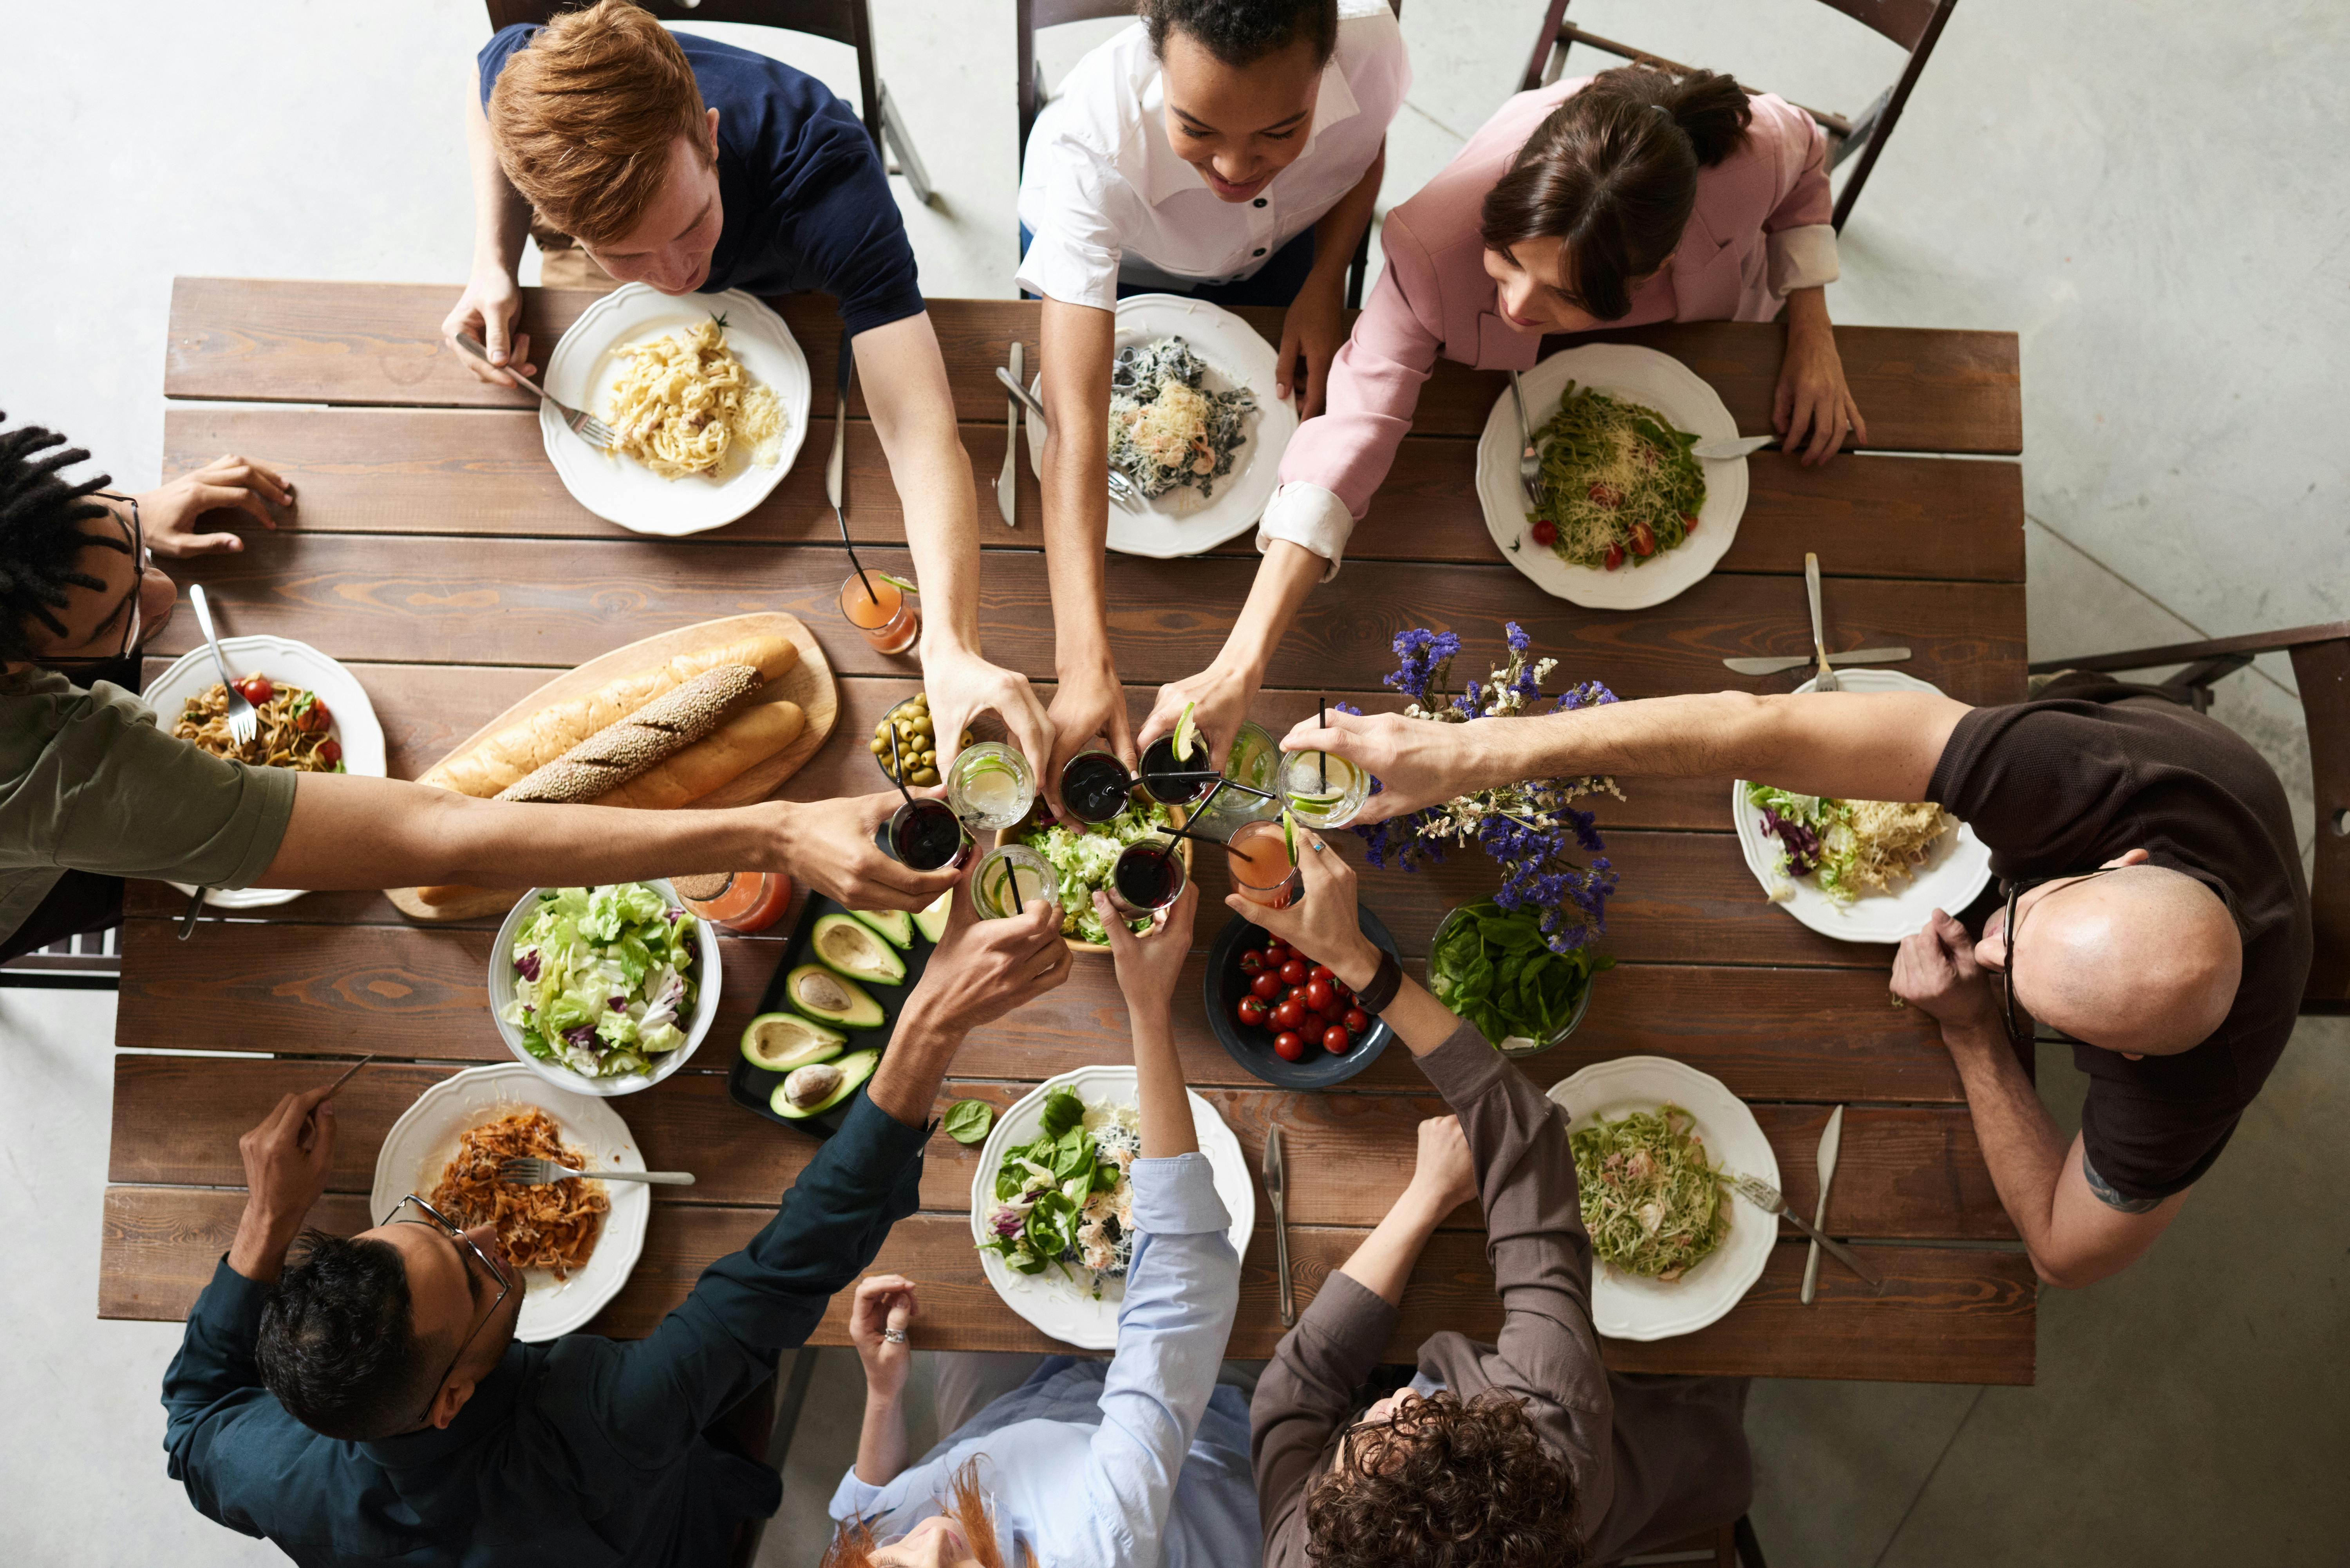 Friends eating out | Source: Pexels